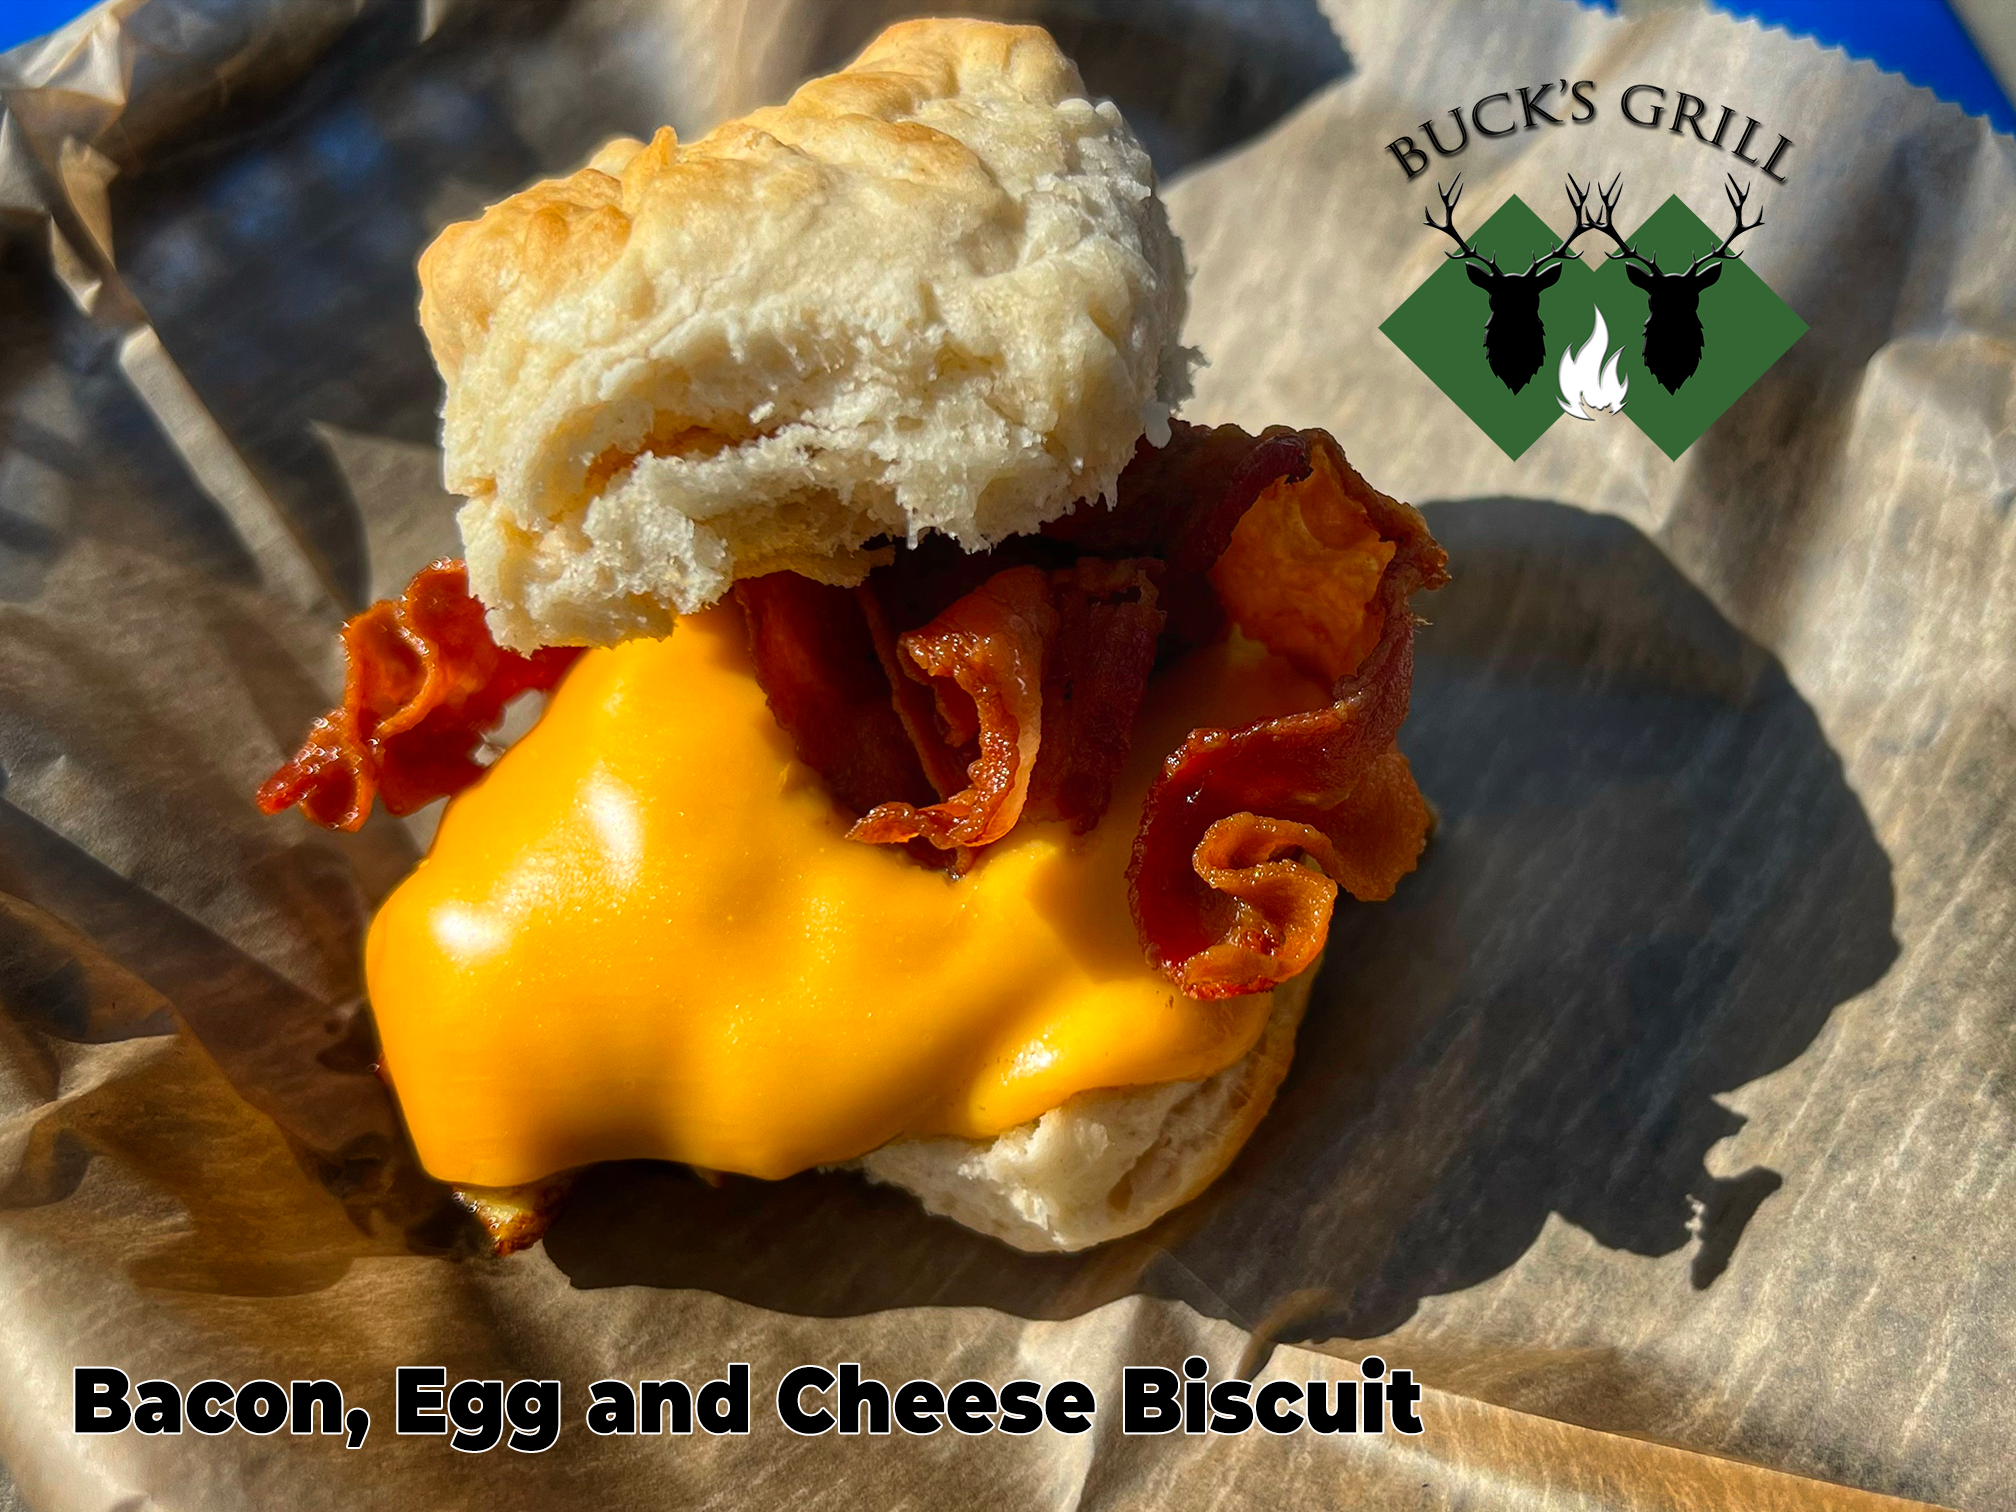 Bacon Egg and Cheese Biscuit at Bucks Grill